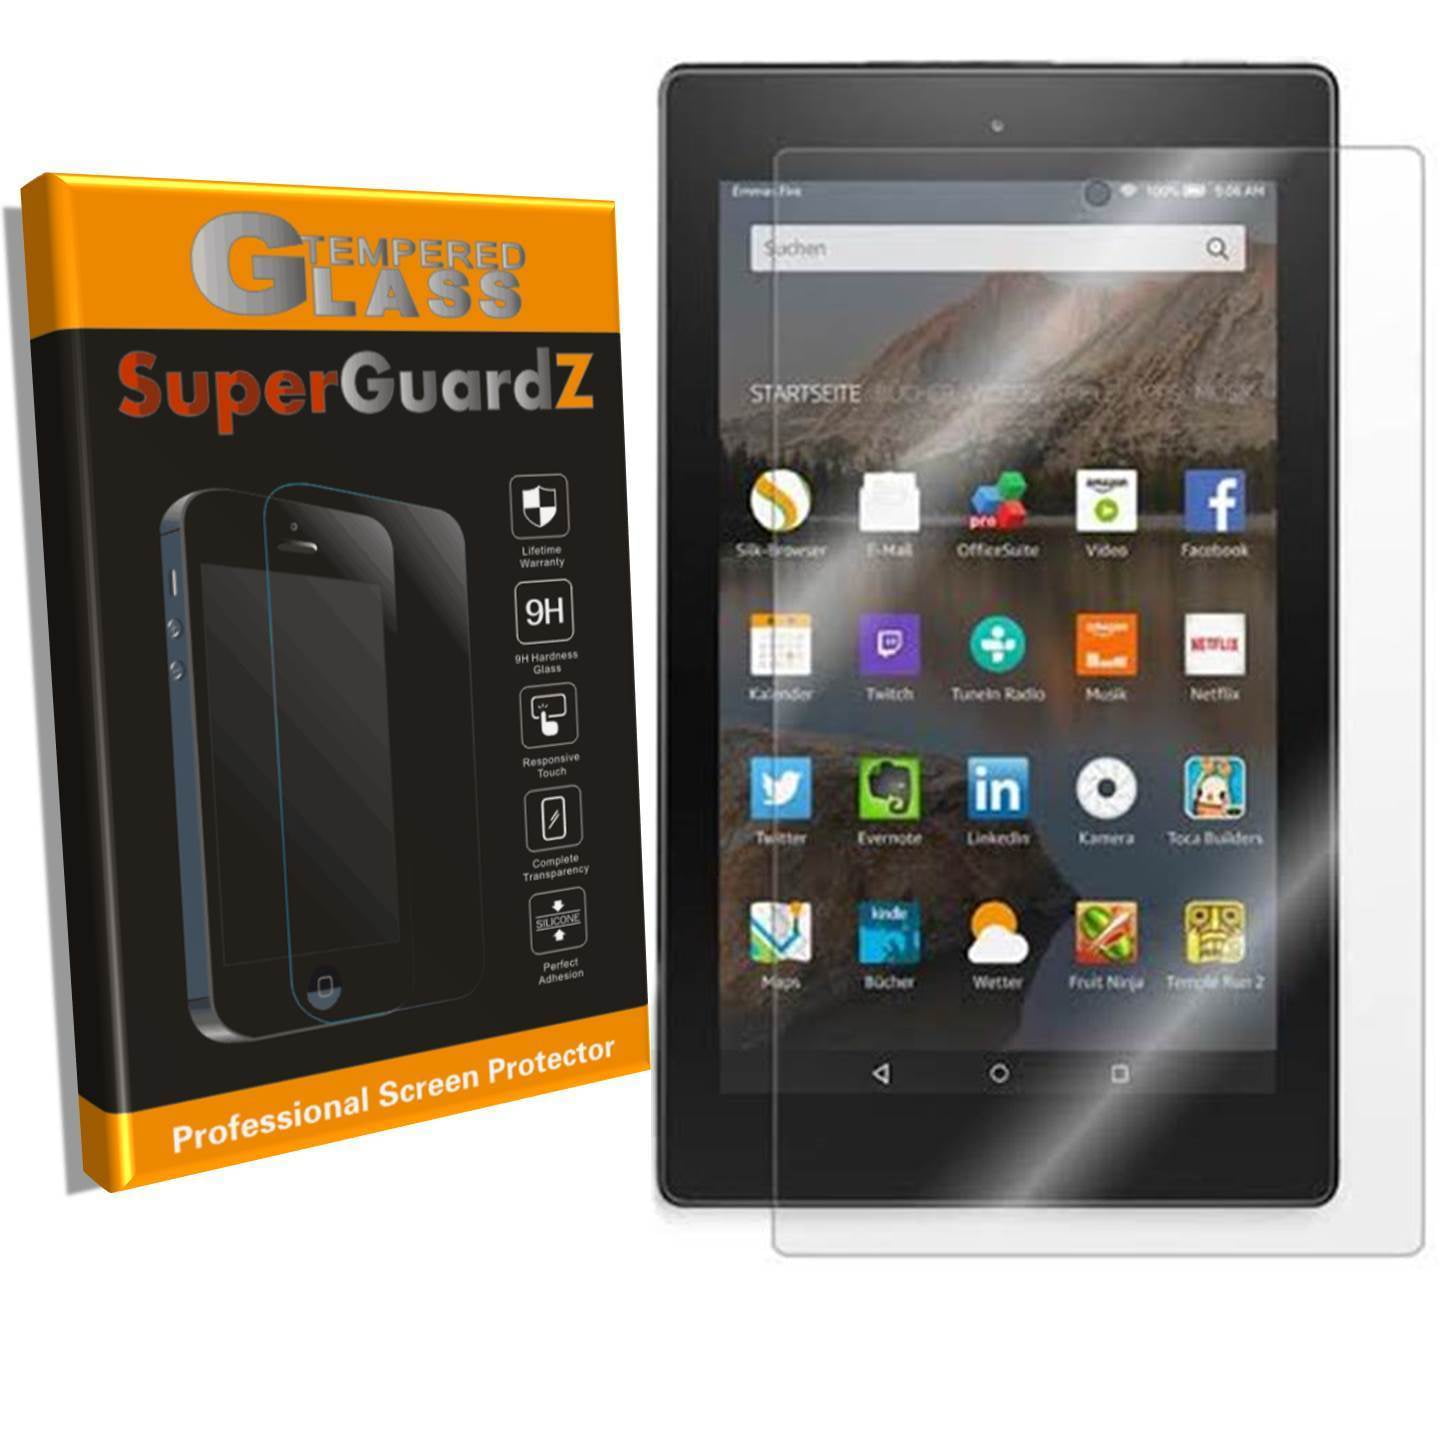 Tempered Glass Screen Protector 2013 2-PACK Amazon Kindle Fire HDX 7" 